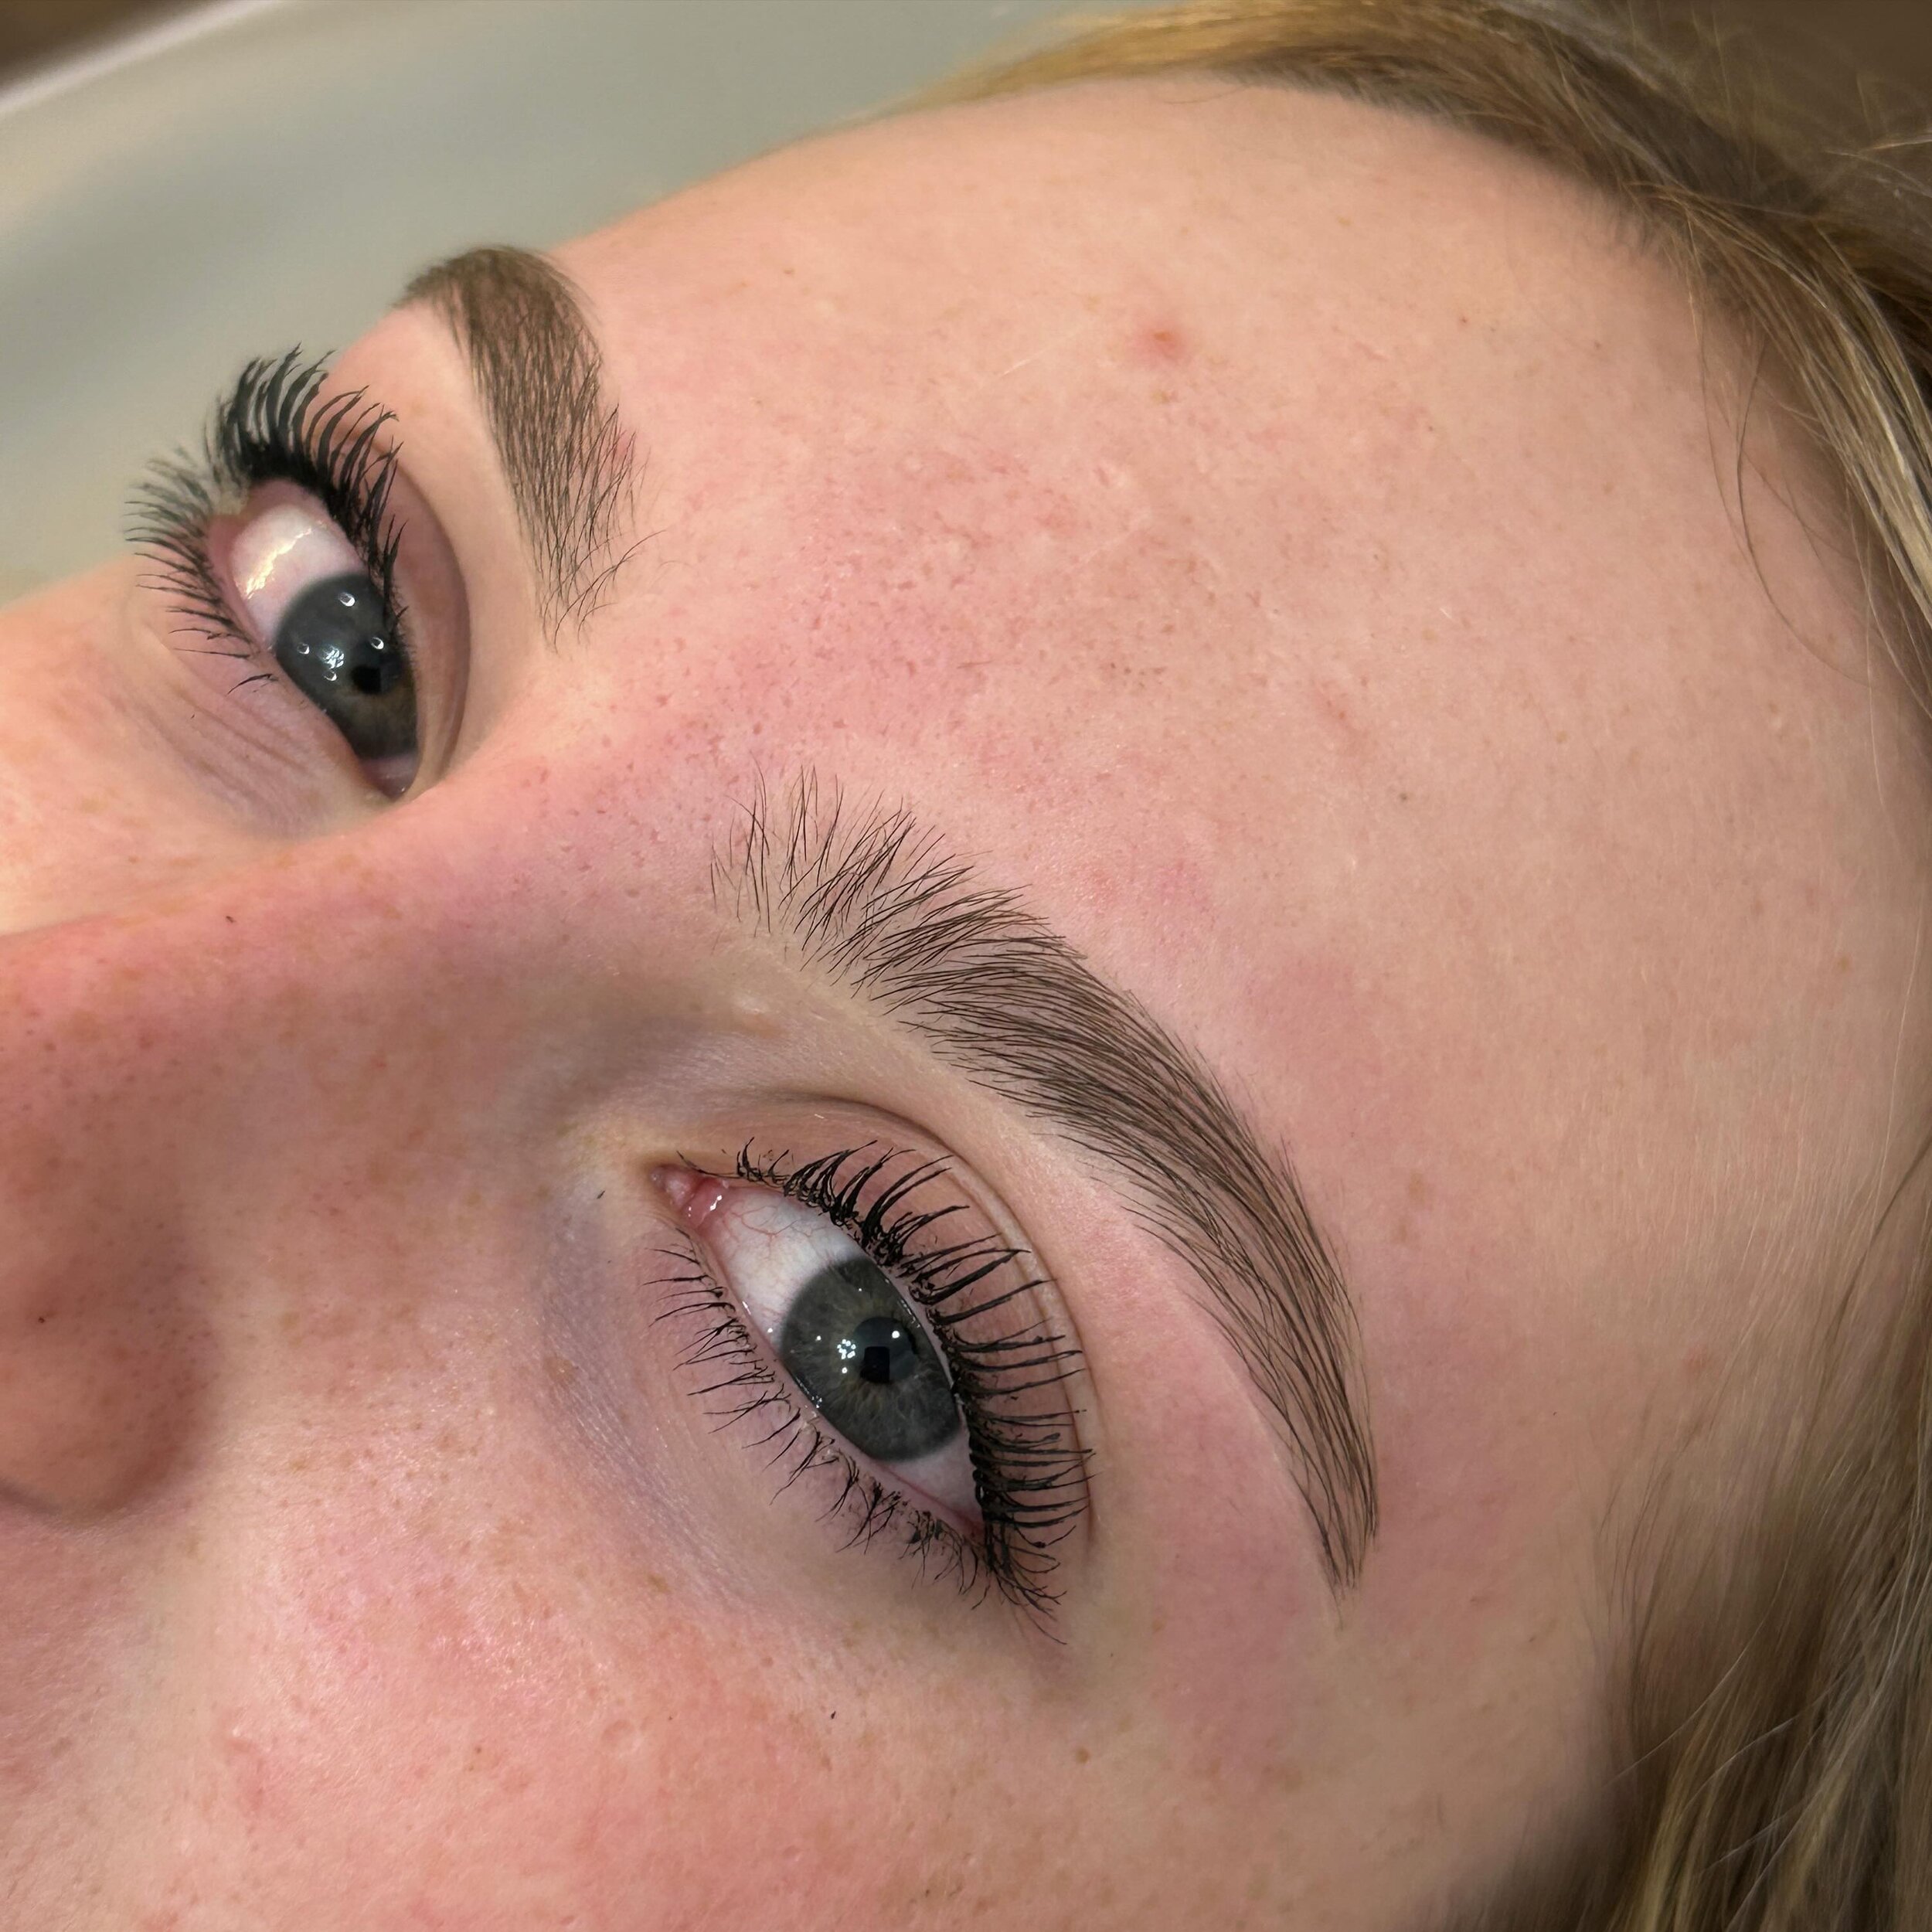 She prom ready✨💅🏼
We did a light clean up underneath and around her brows, follwed by some trimming. Its amazing what a simple brow wax can do!

April and May is filling up for prom and graduation szn👩🏼&zwj;🎓 Book ahead online or in person🤍

Pr